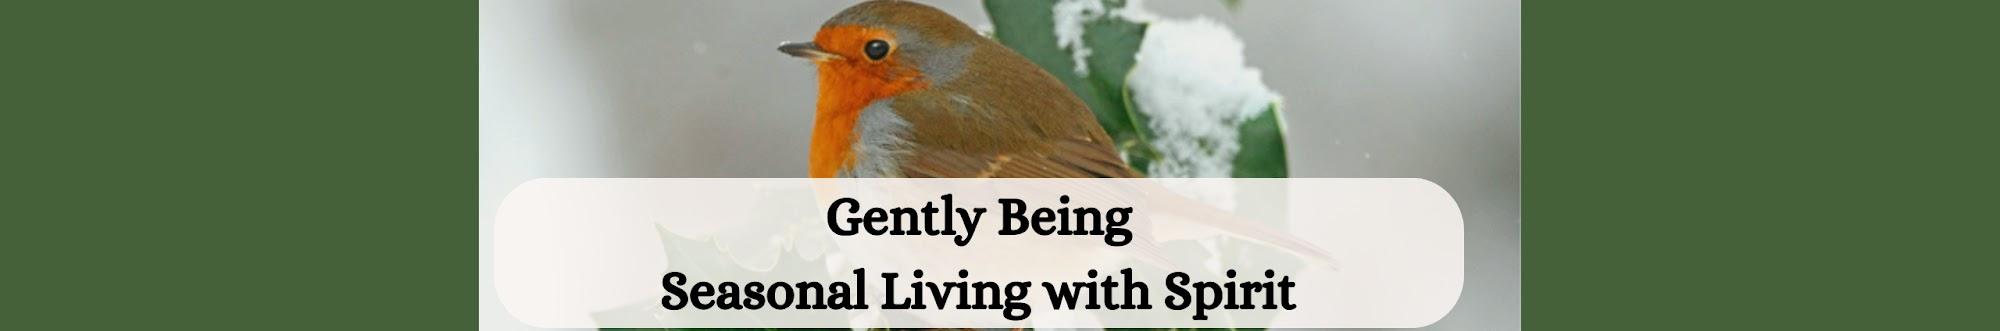 Gently Being